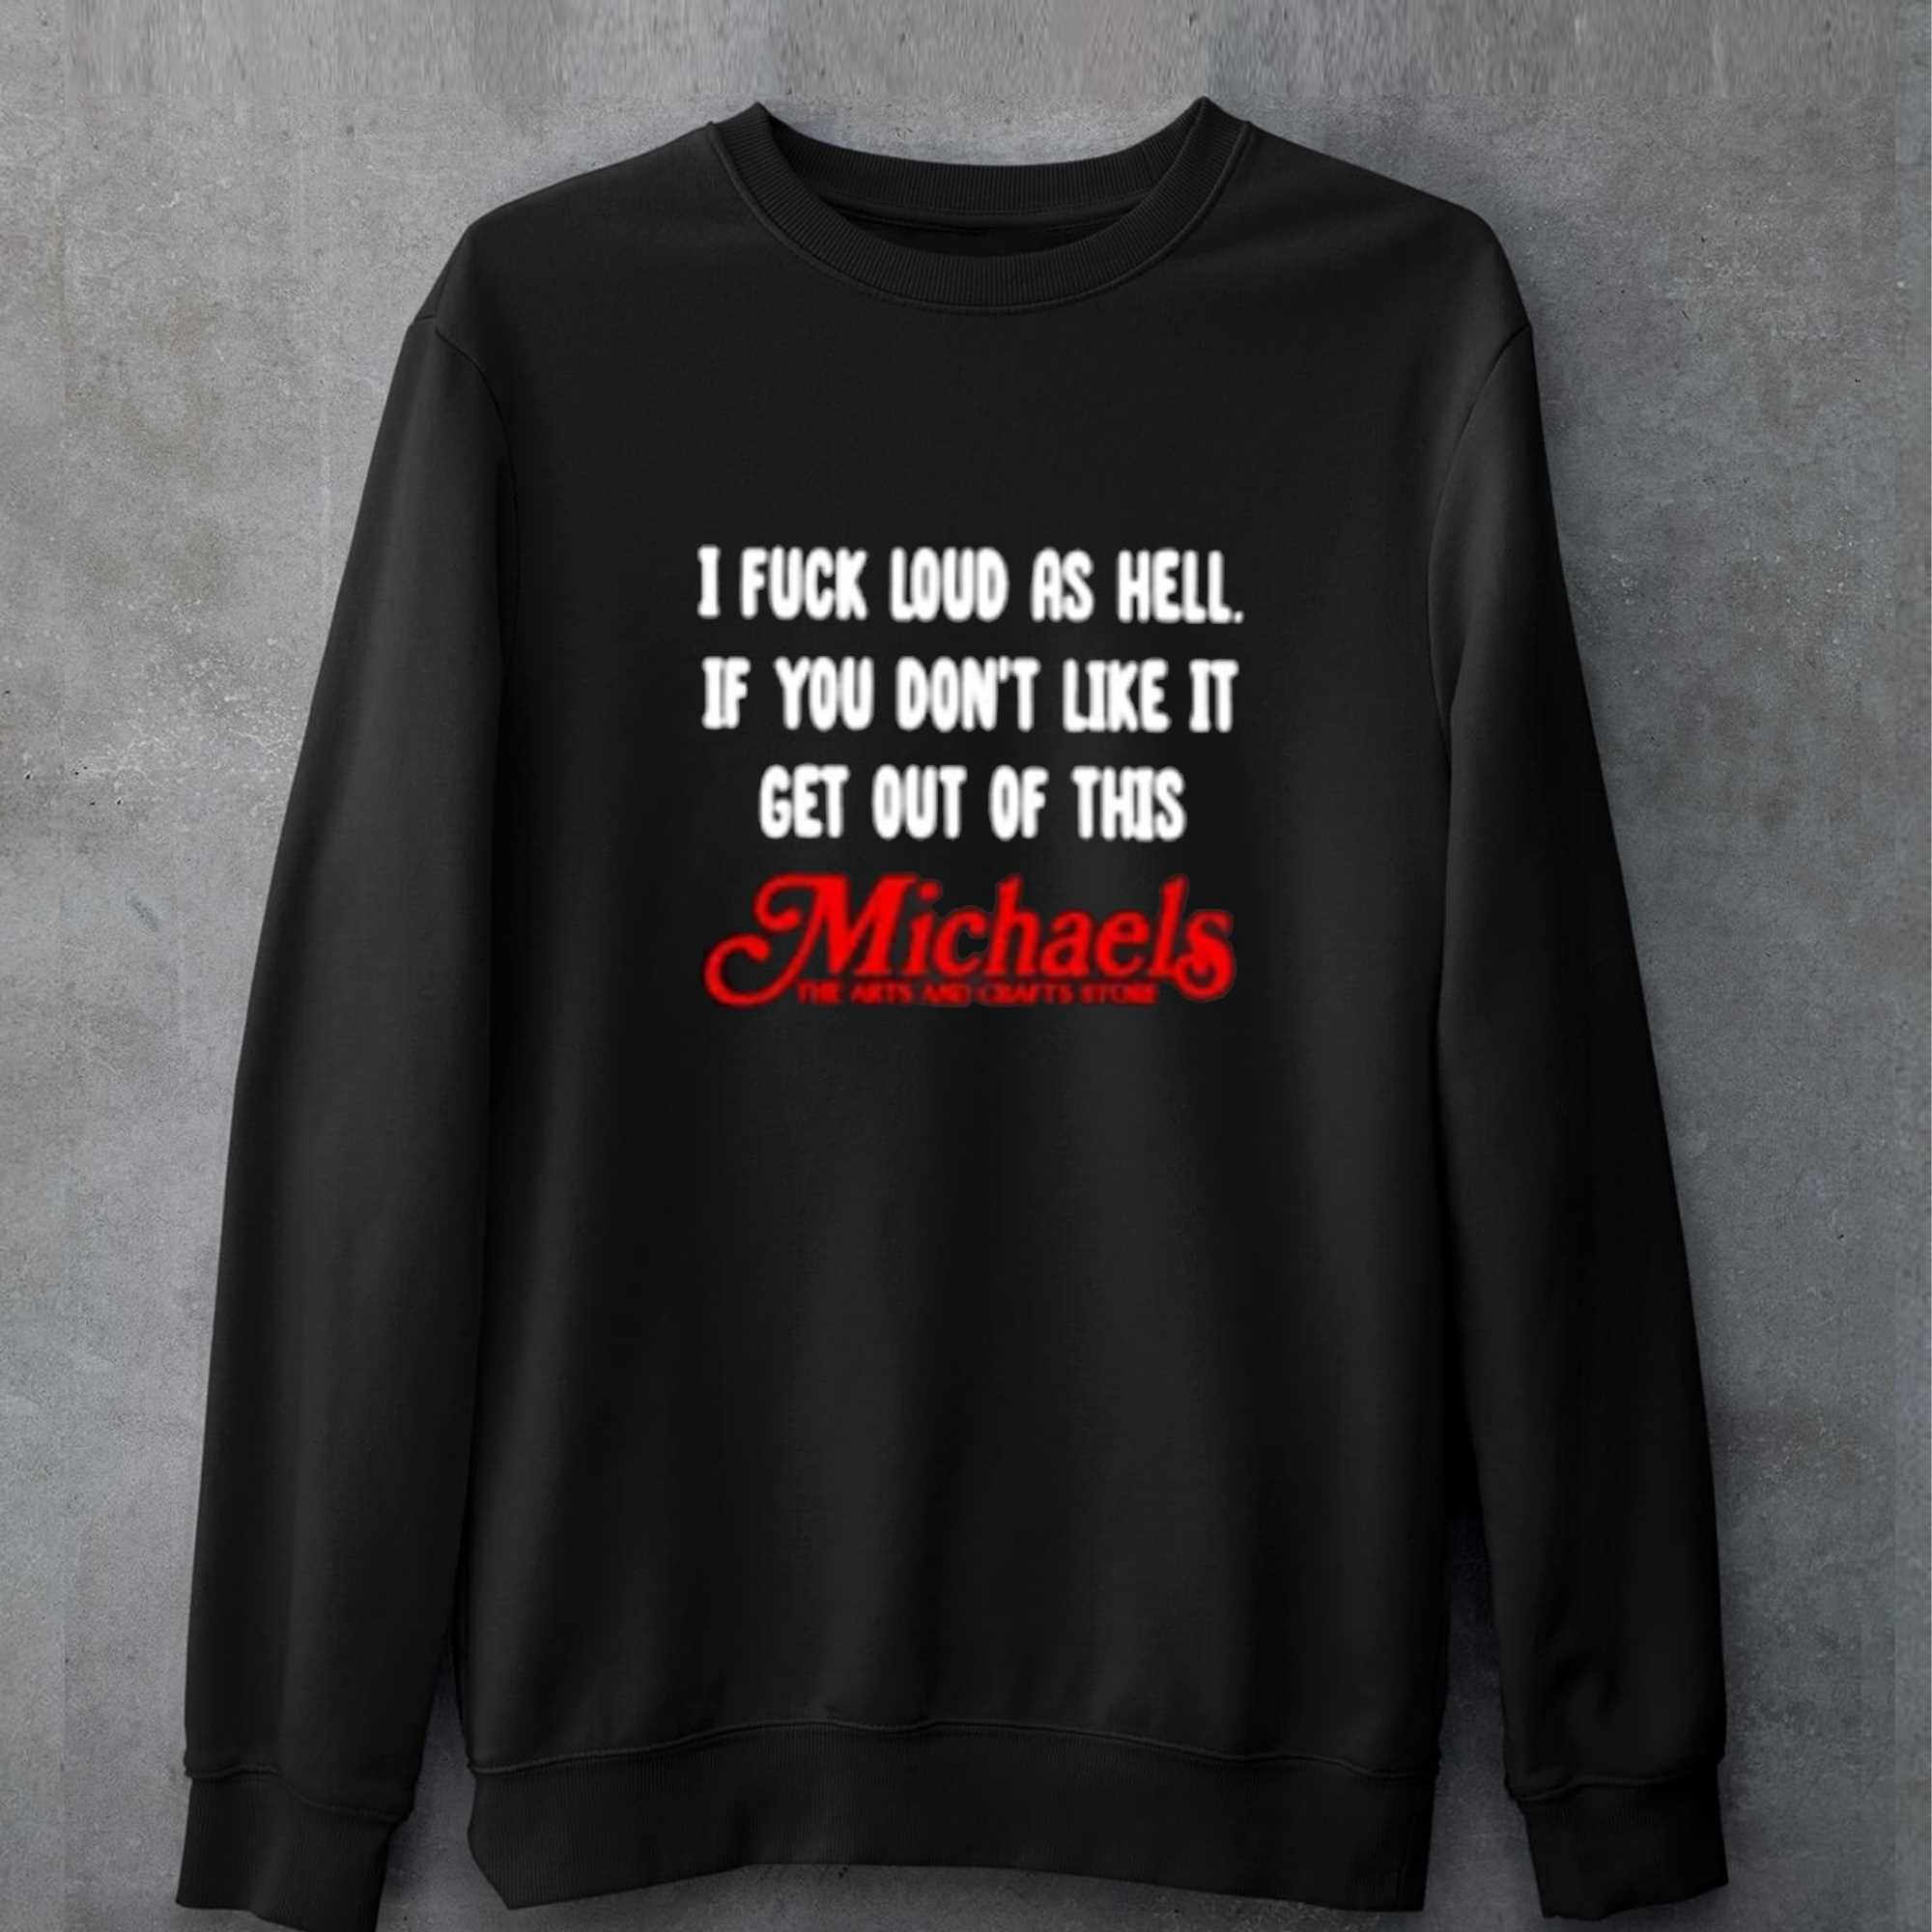 Michaels The Arts And Crafts Store T-shirt 